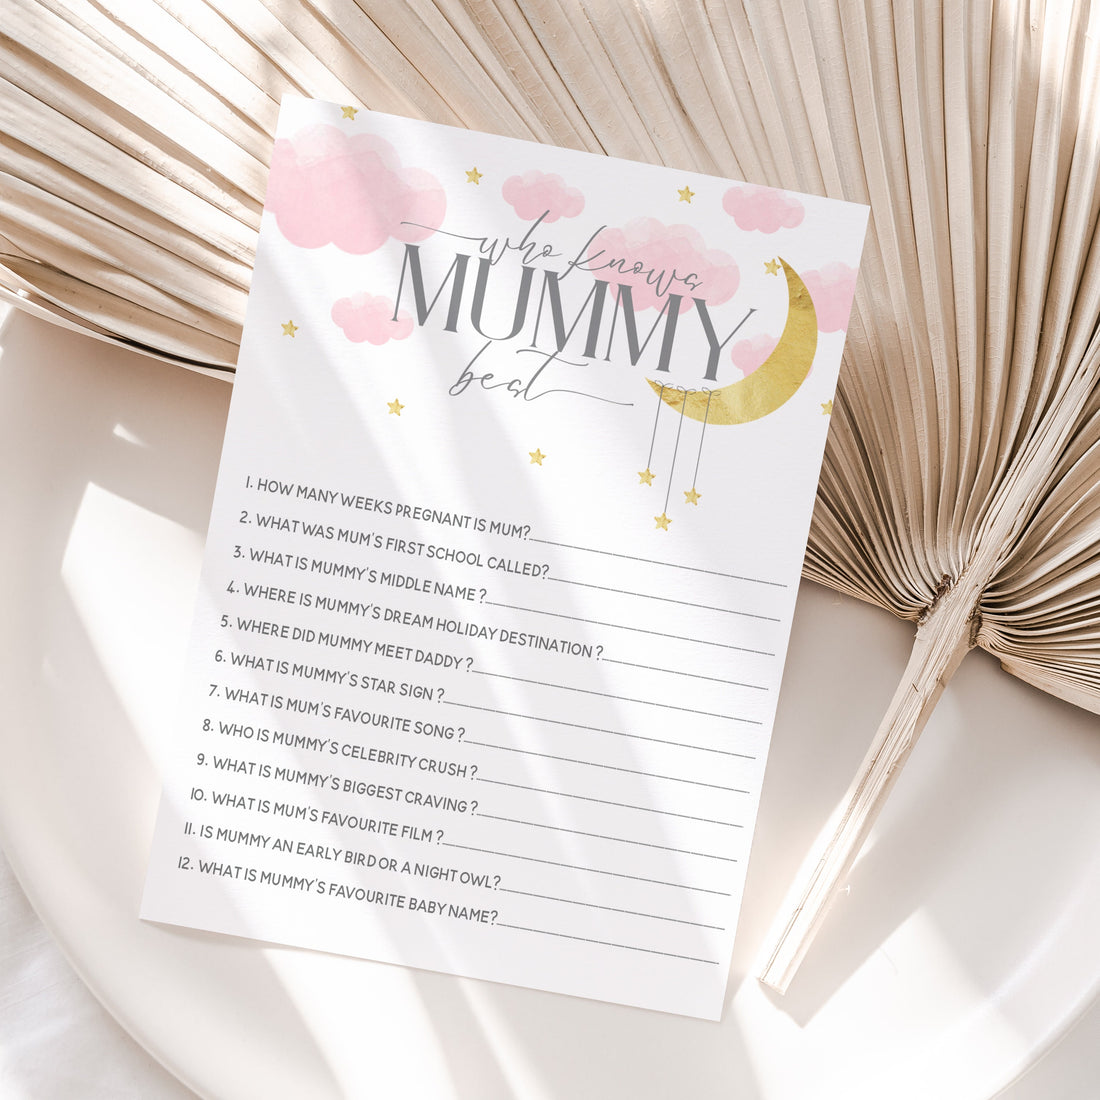 Whimsical Baby Girl Pink Who Knows Mummy Best Cards